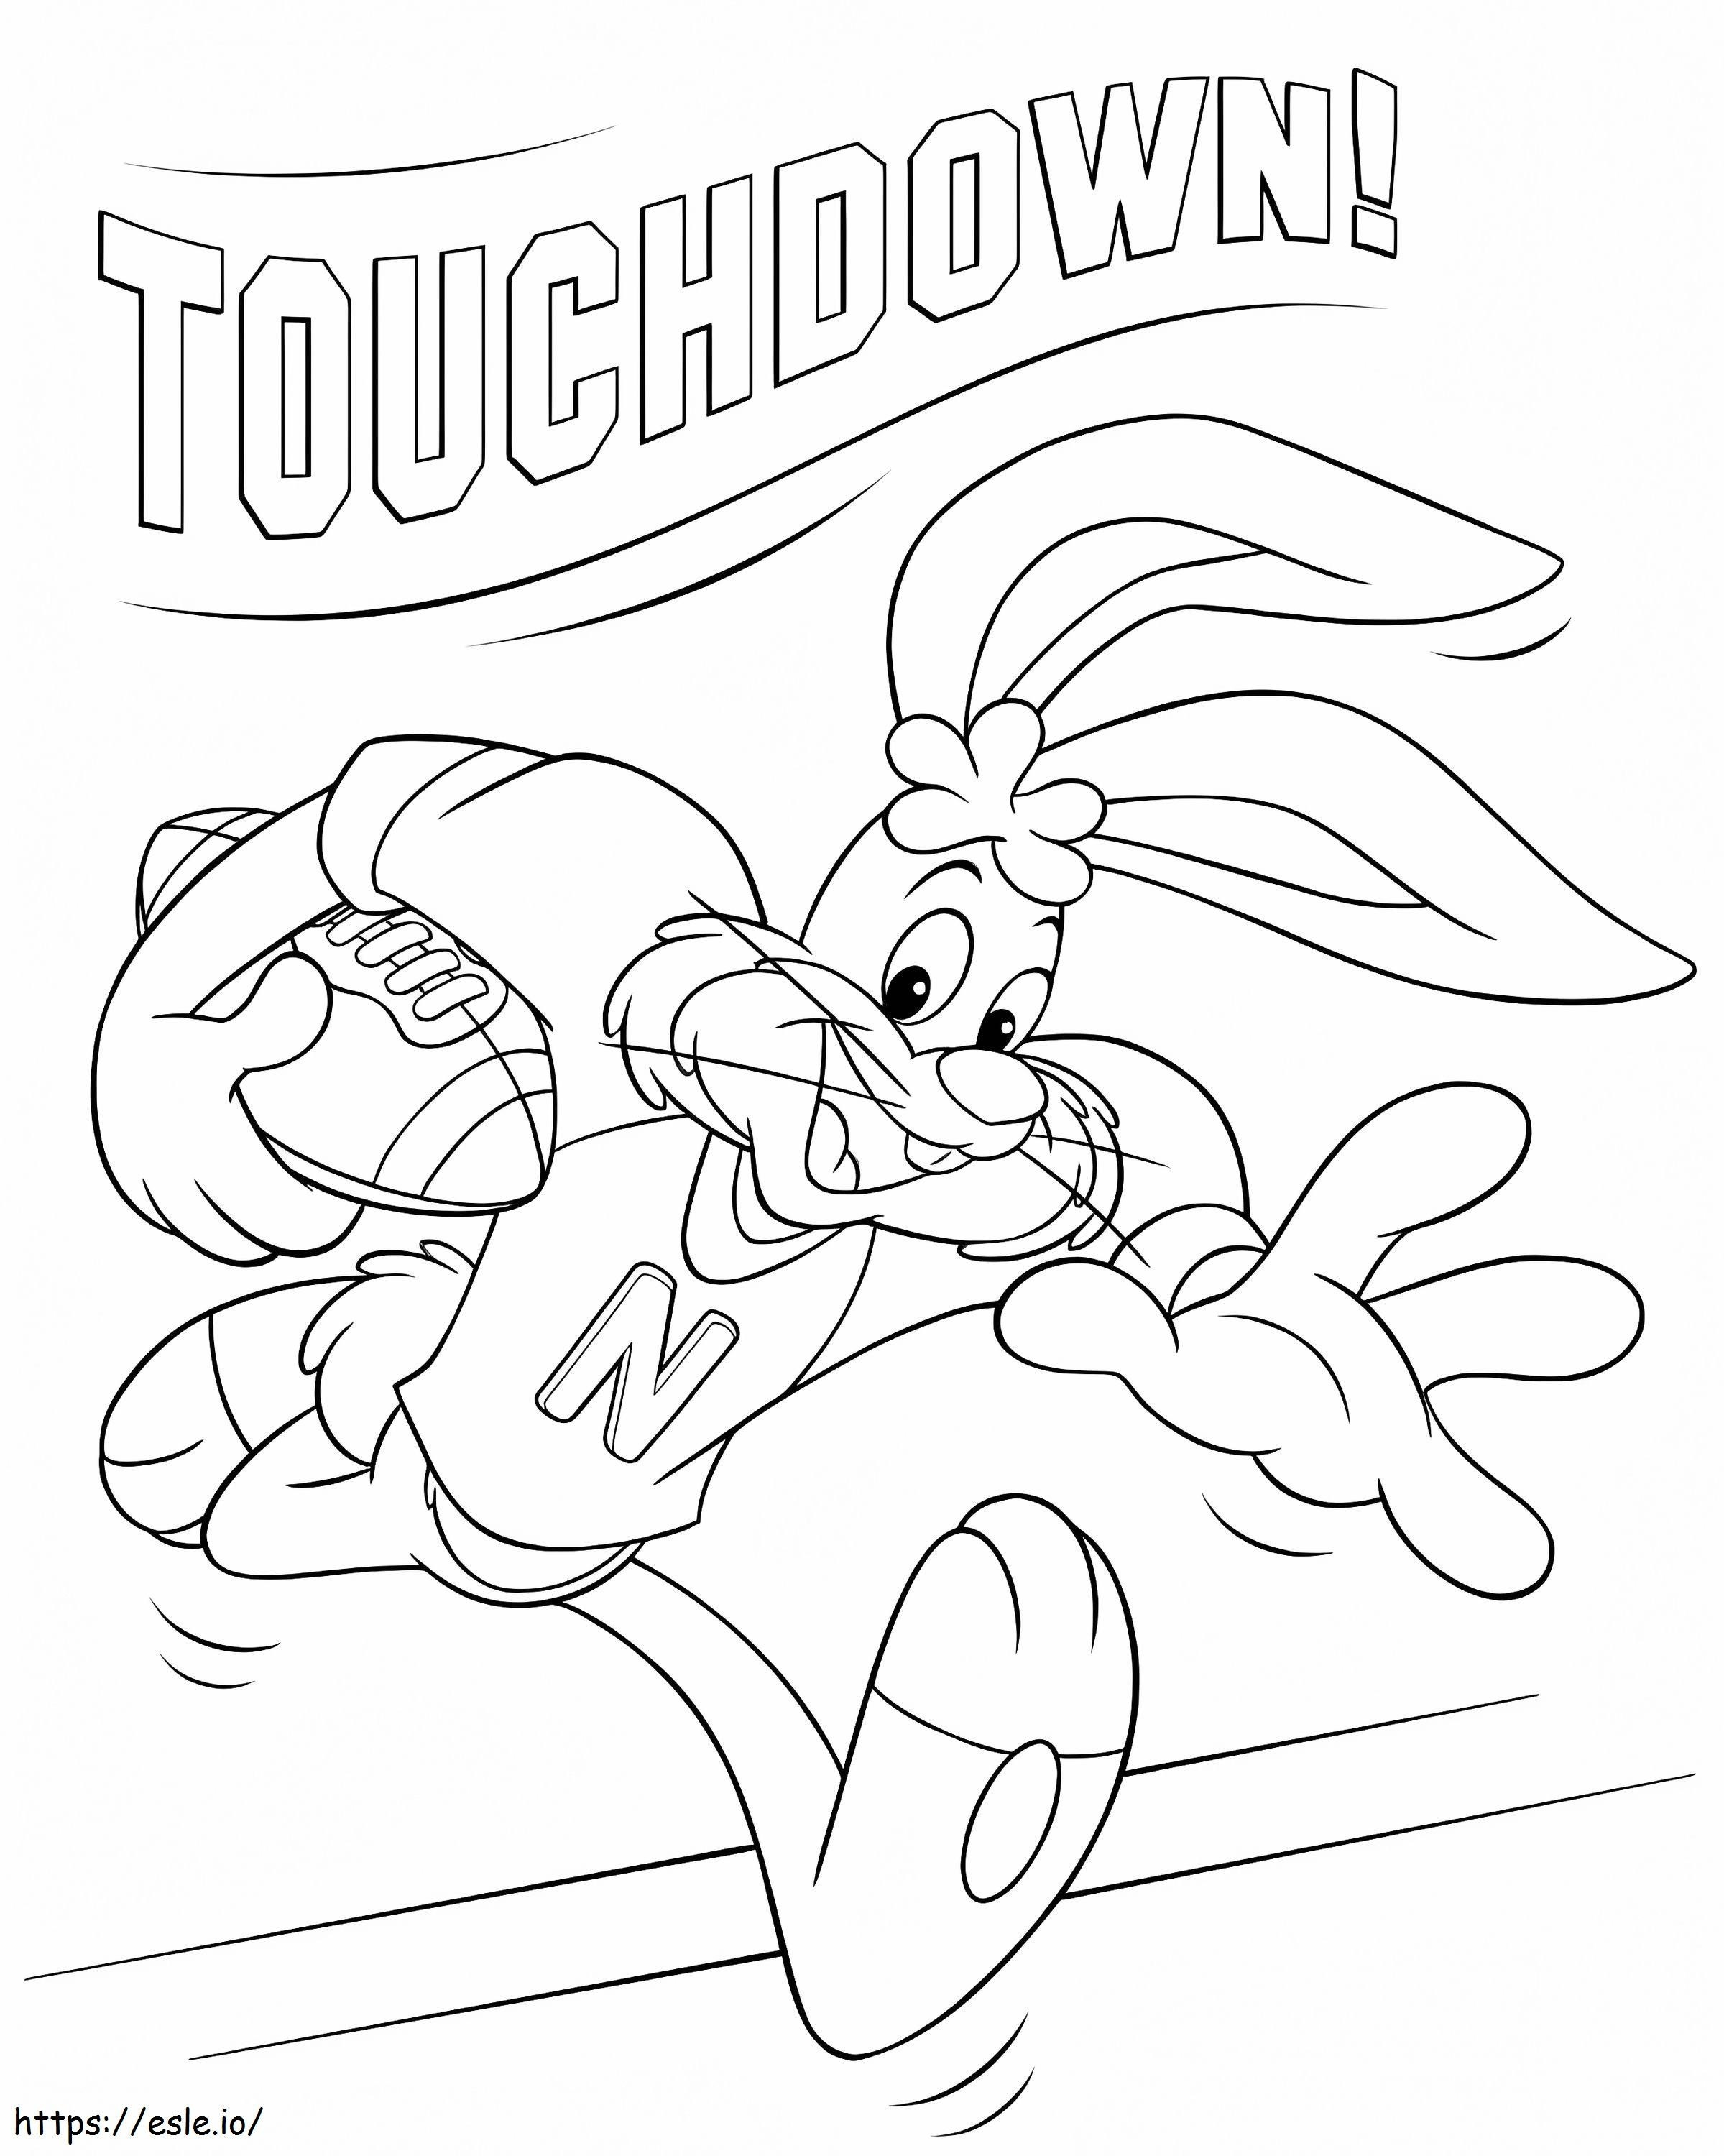 Nesquik Touchdown coloring page